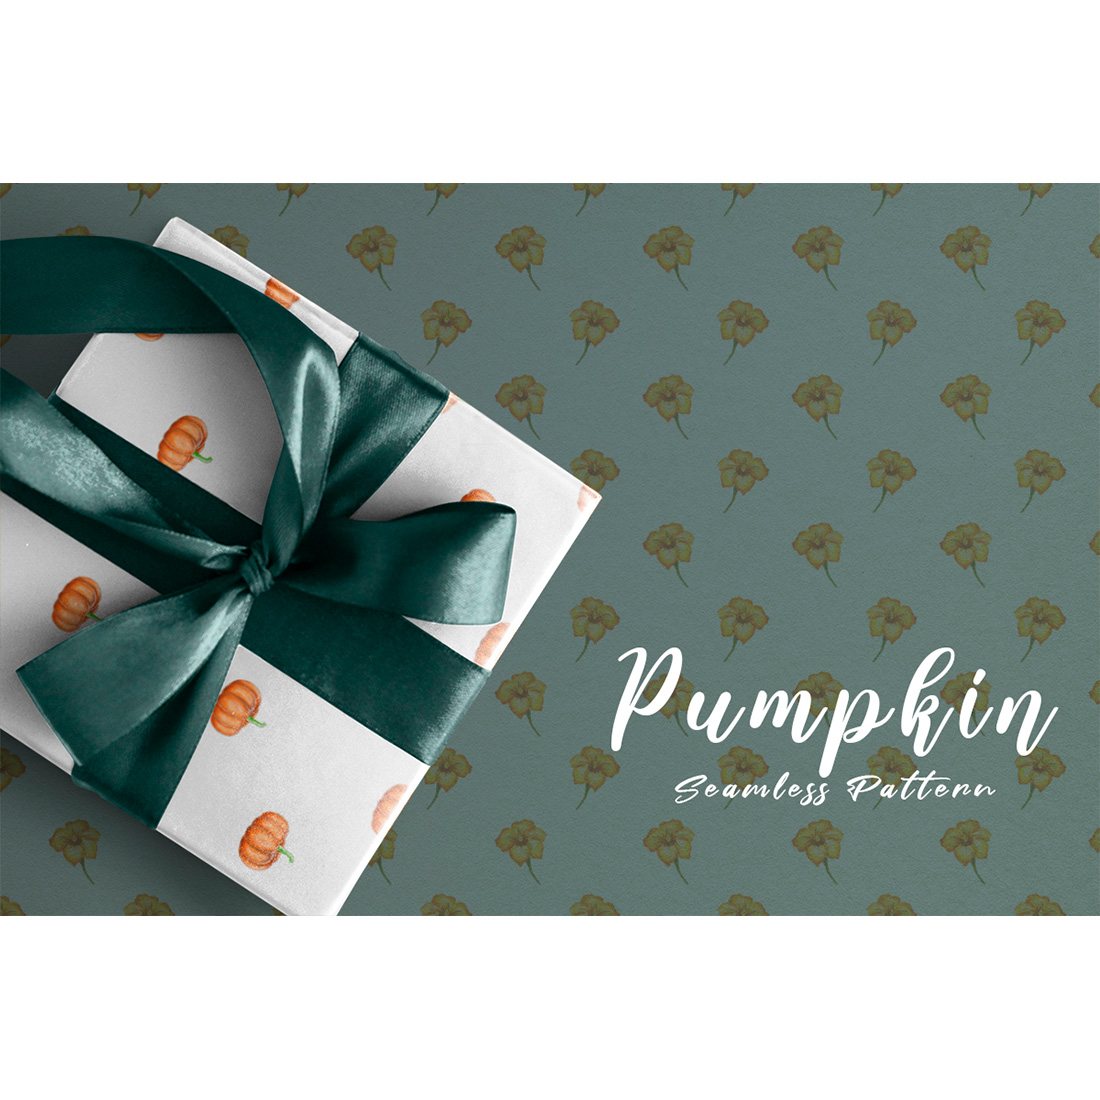 Image of wrapping paper with wonderful pumpkin patterns